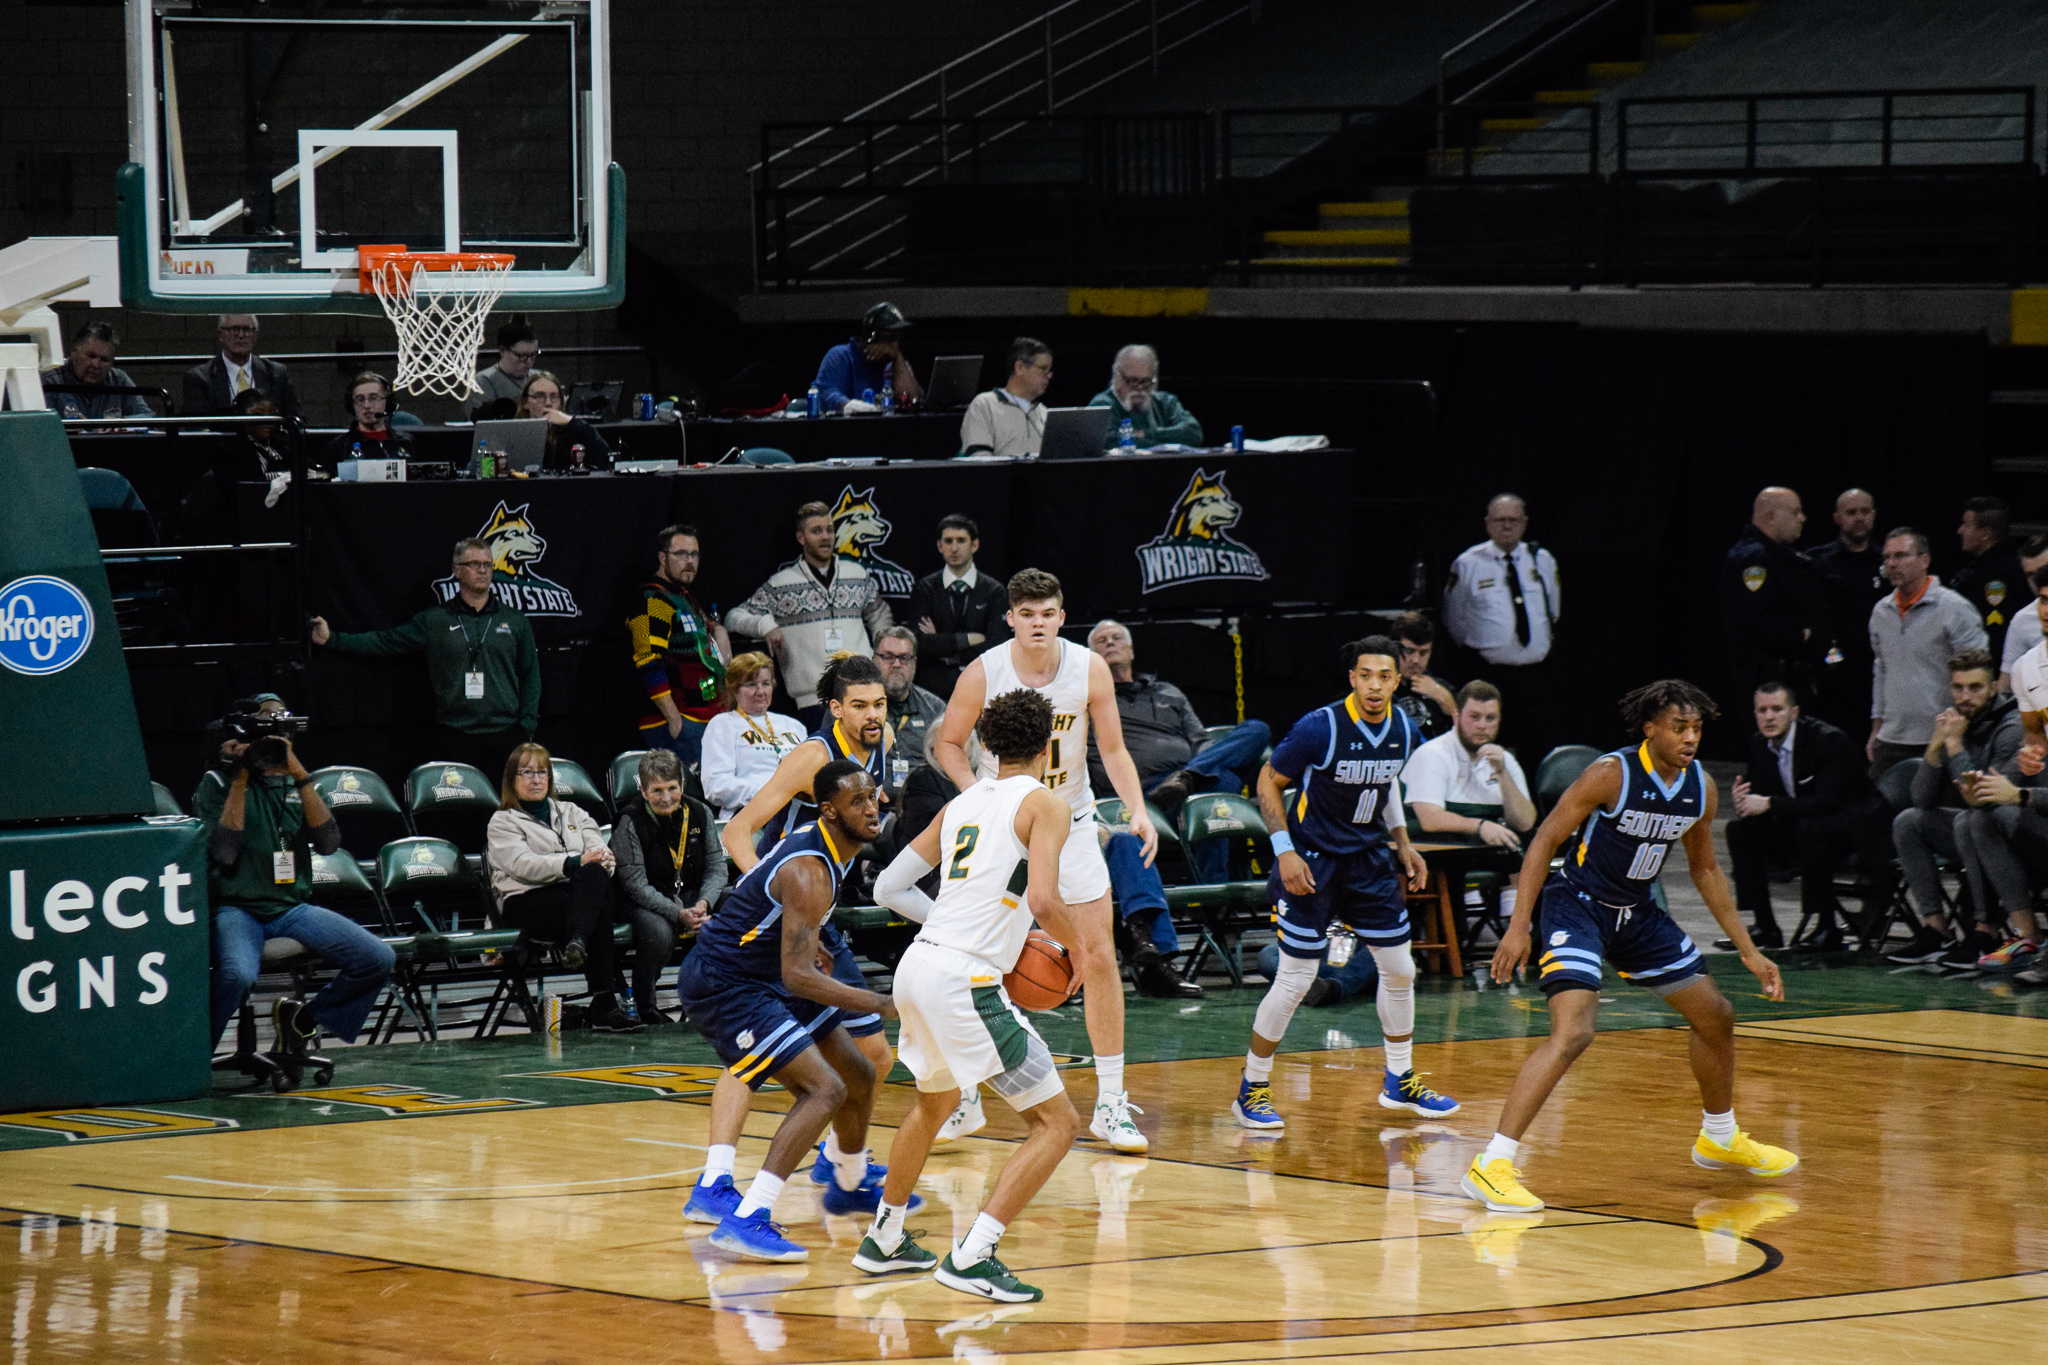 Wright State vs. Southern University Men's Basketball | Photo by Jessica Fugett | The Wright State Guardian